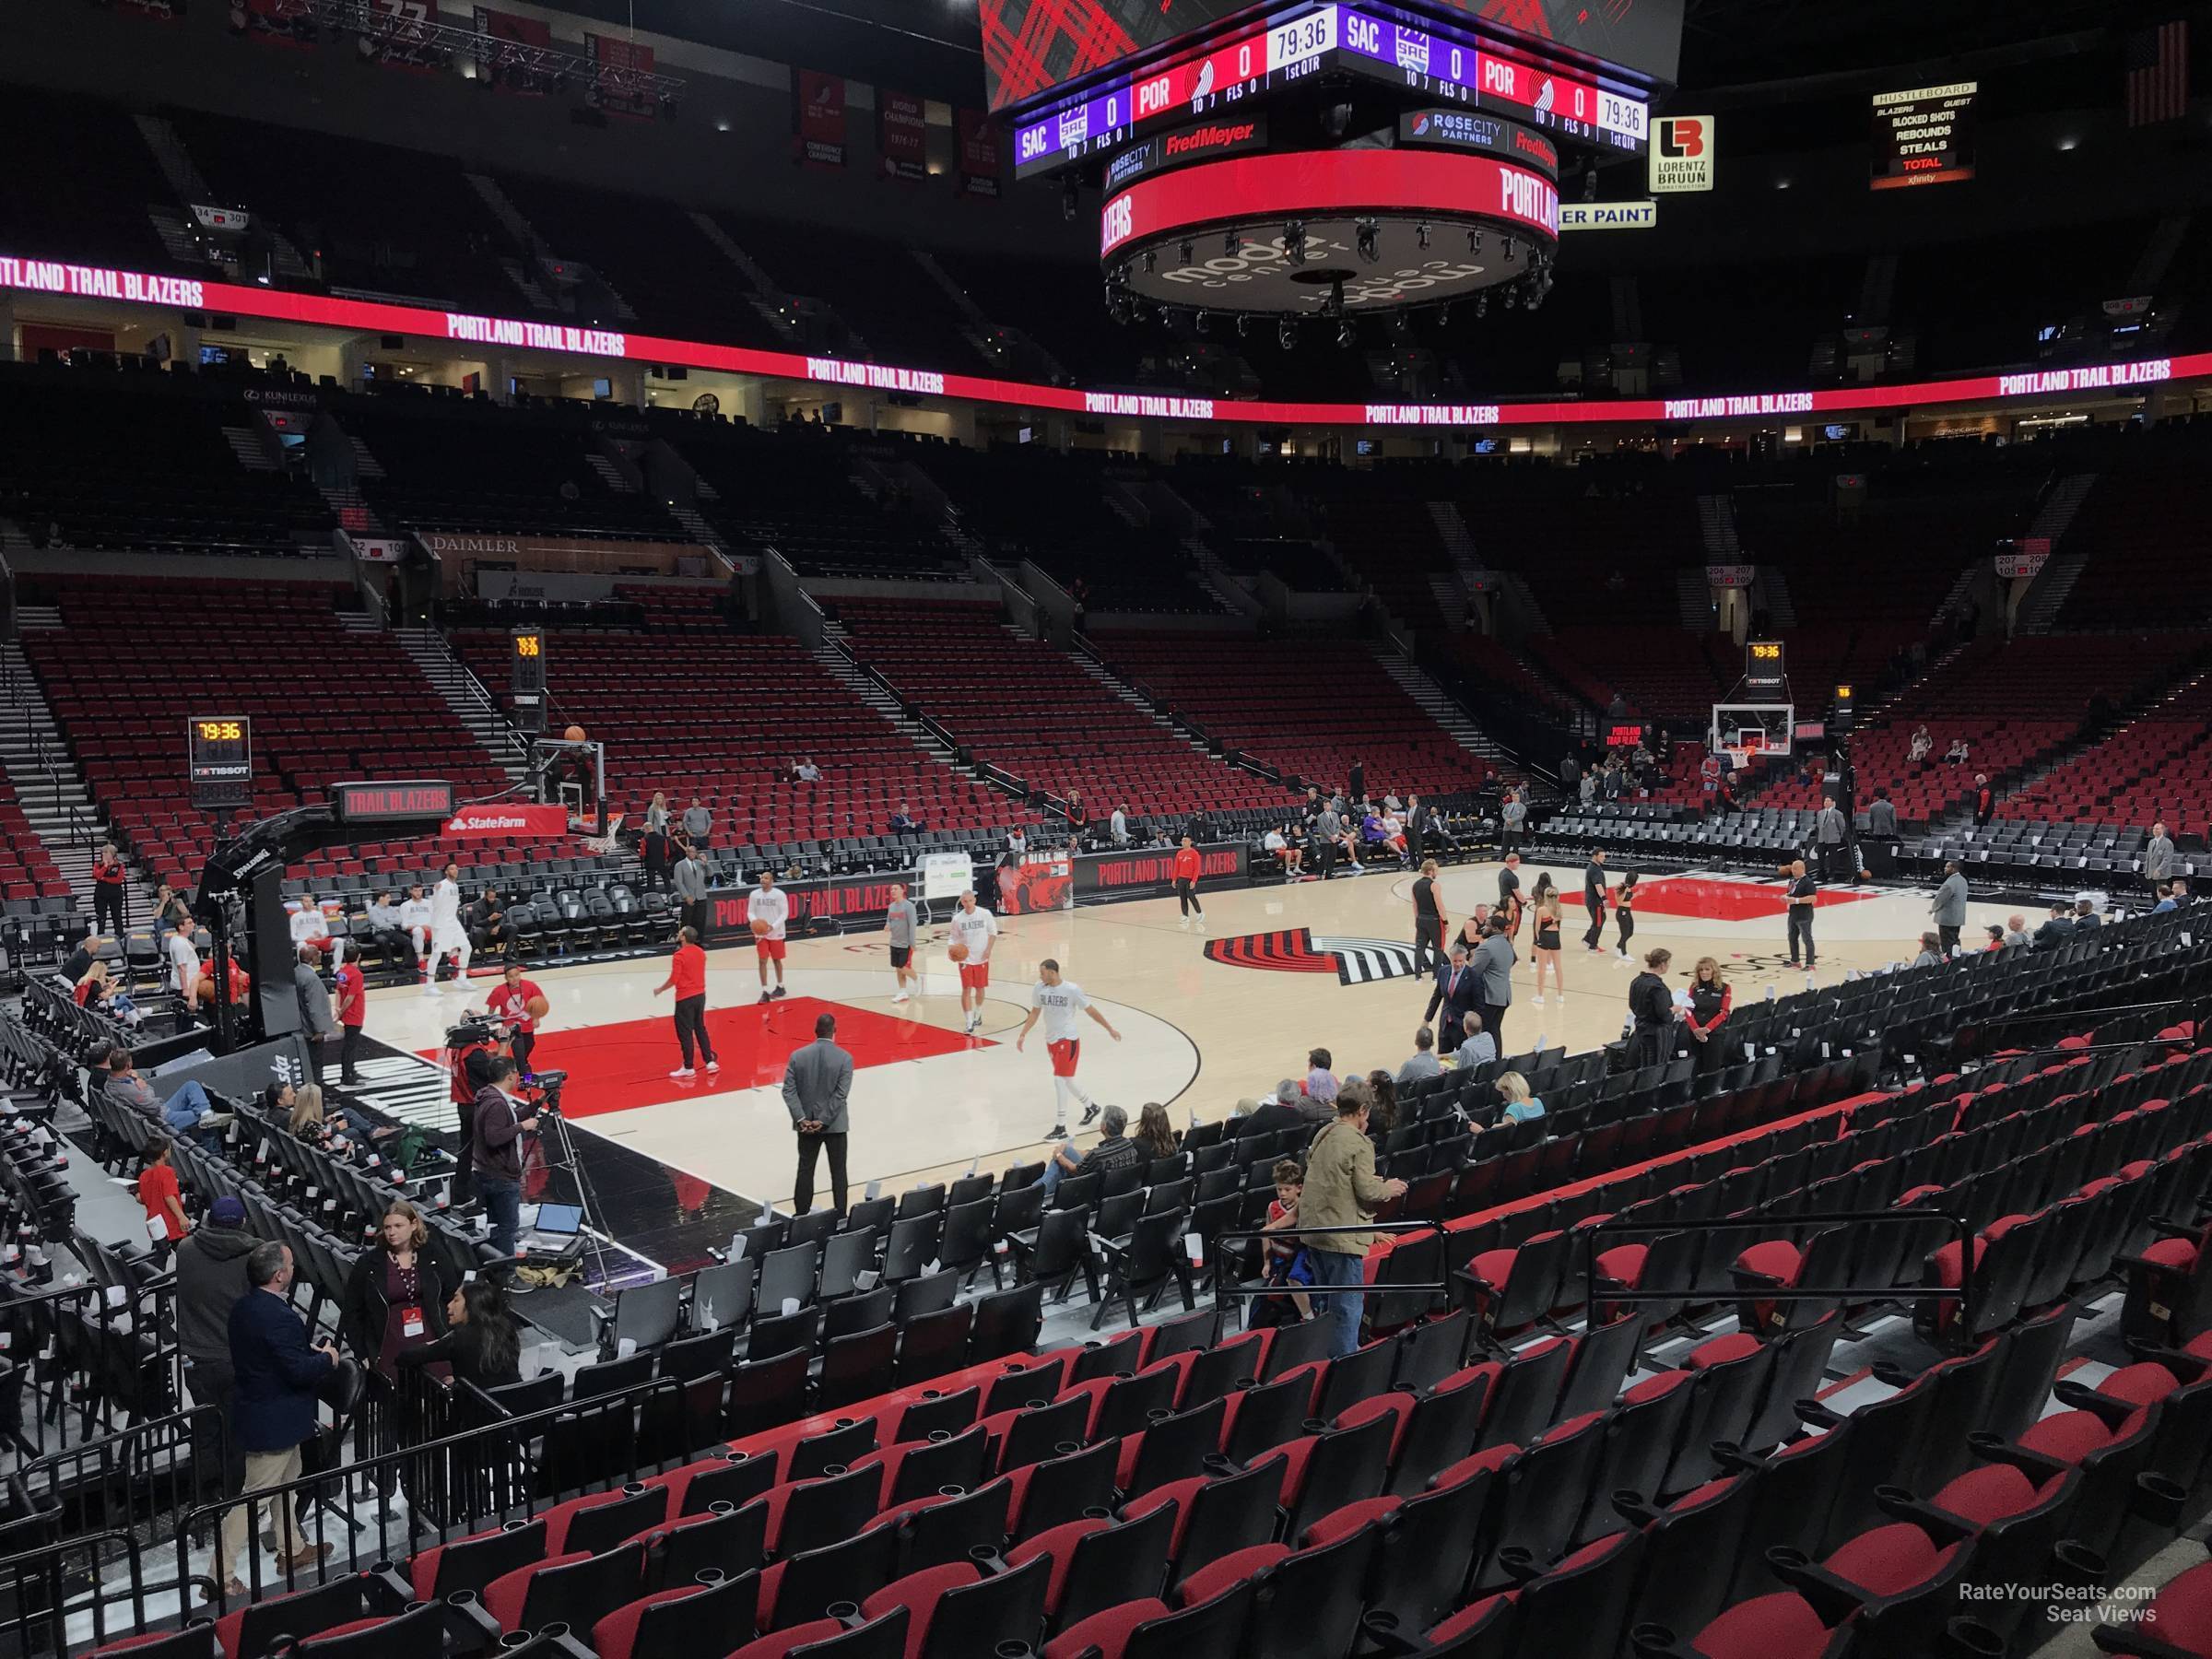 Service to Moda Center and Trail Blazers Games